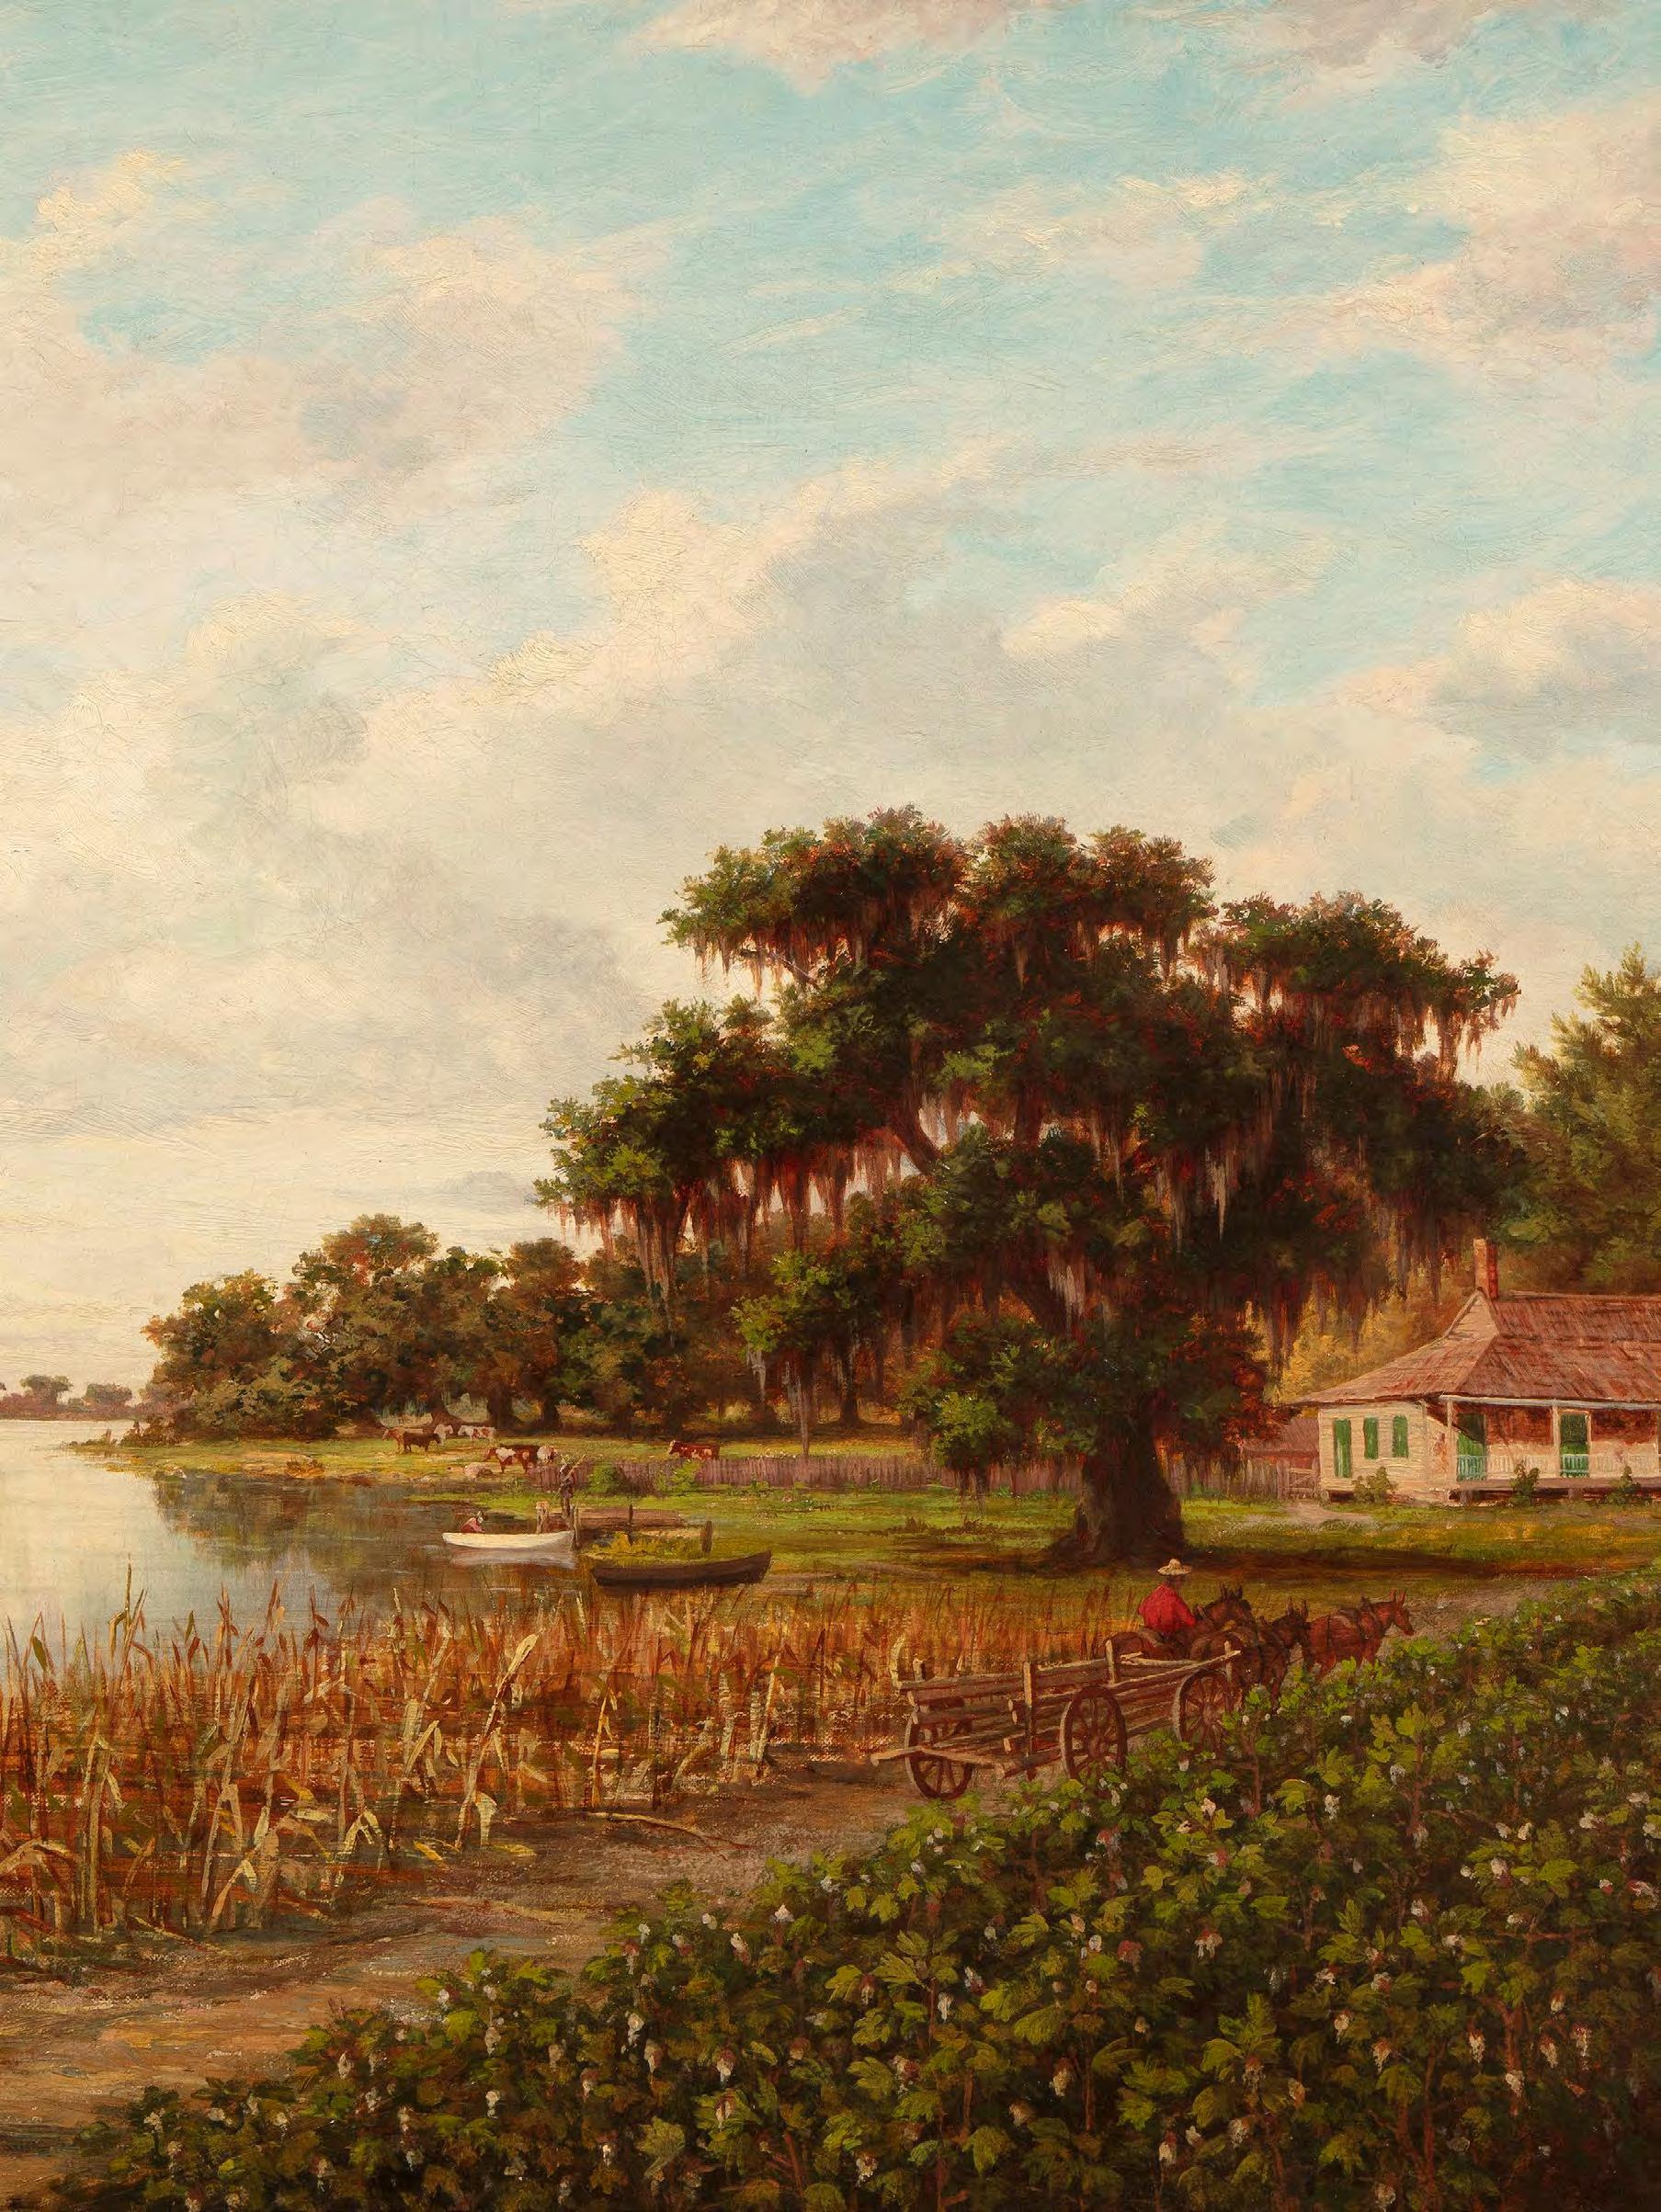 Lush Landscapes and Lively Culture: Exploring 19th Century Louisiana